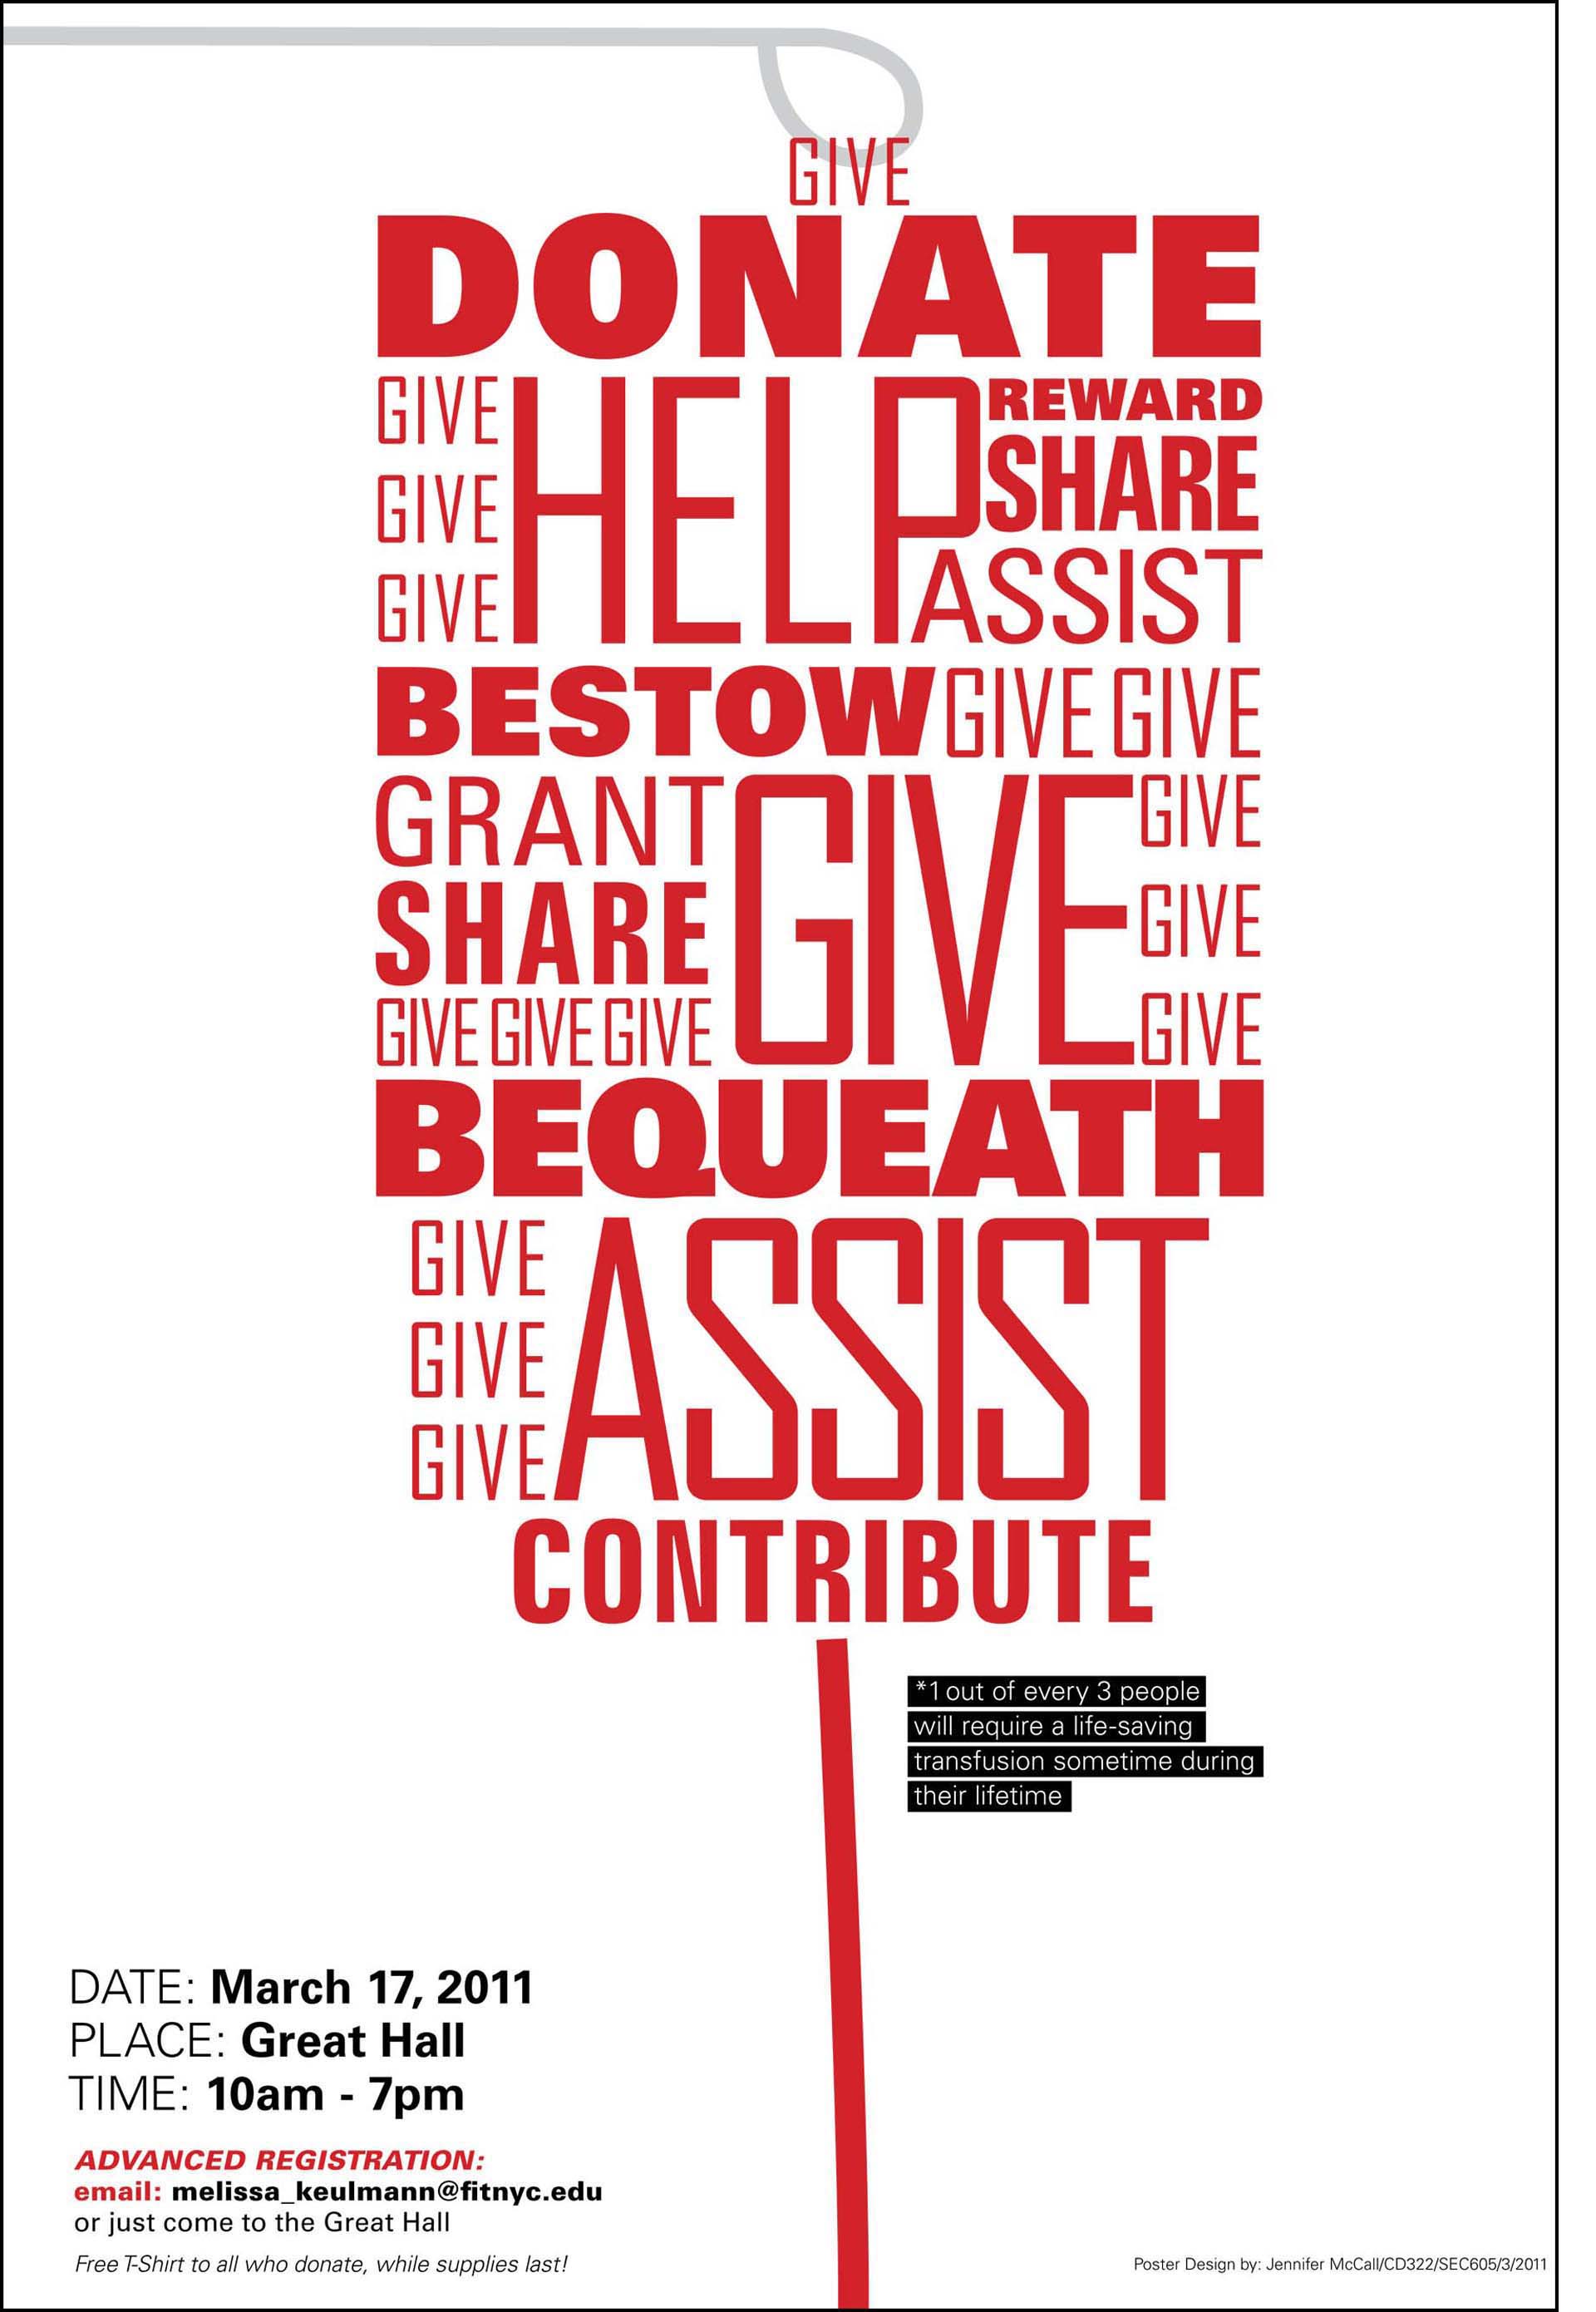 Student Blood Drive Posters by Kathryn Olen at Coroflotcom